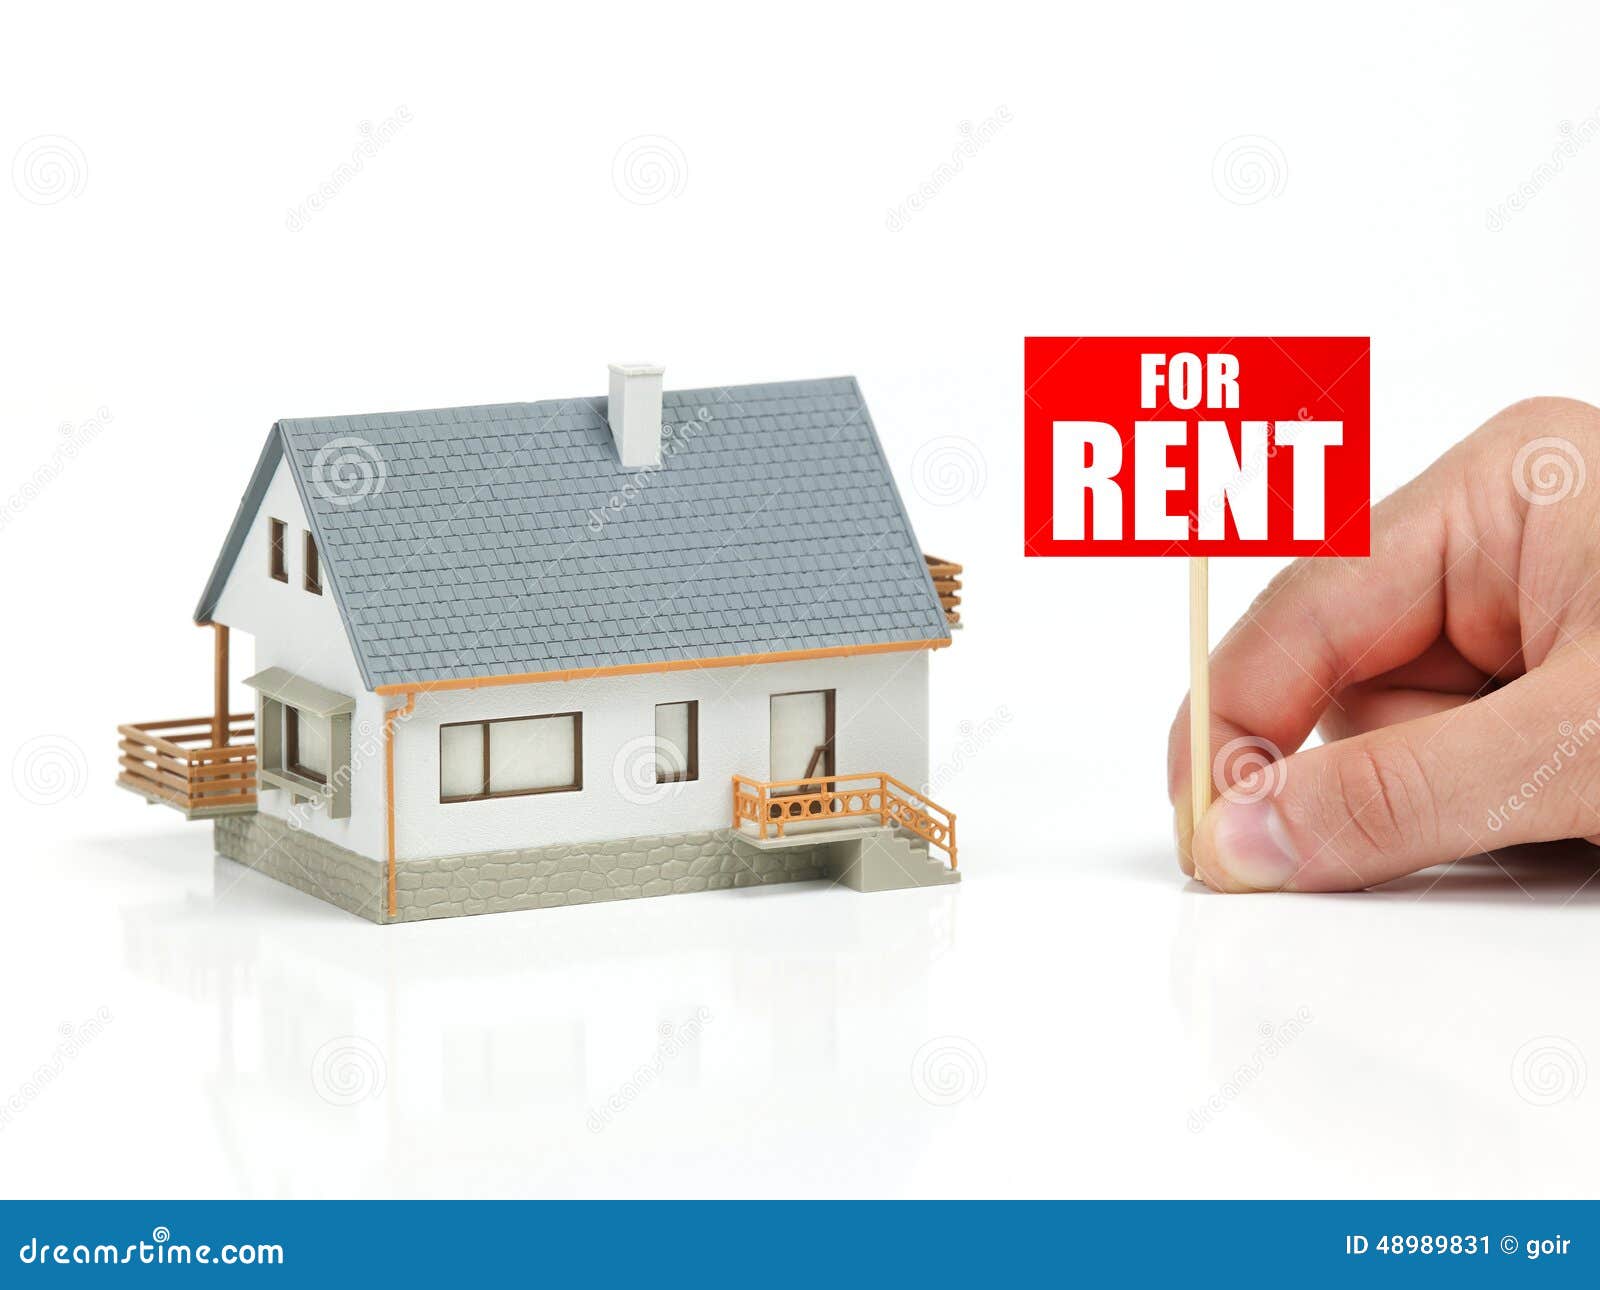 house for rent clipart - photo #47